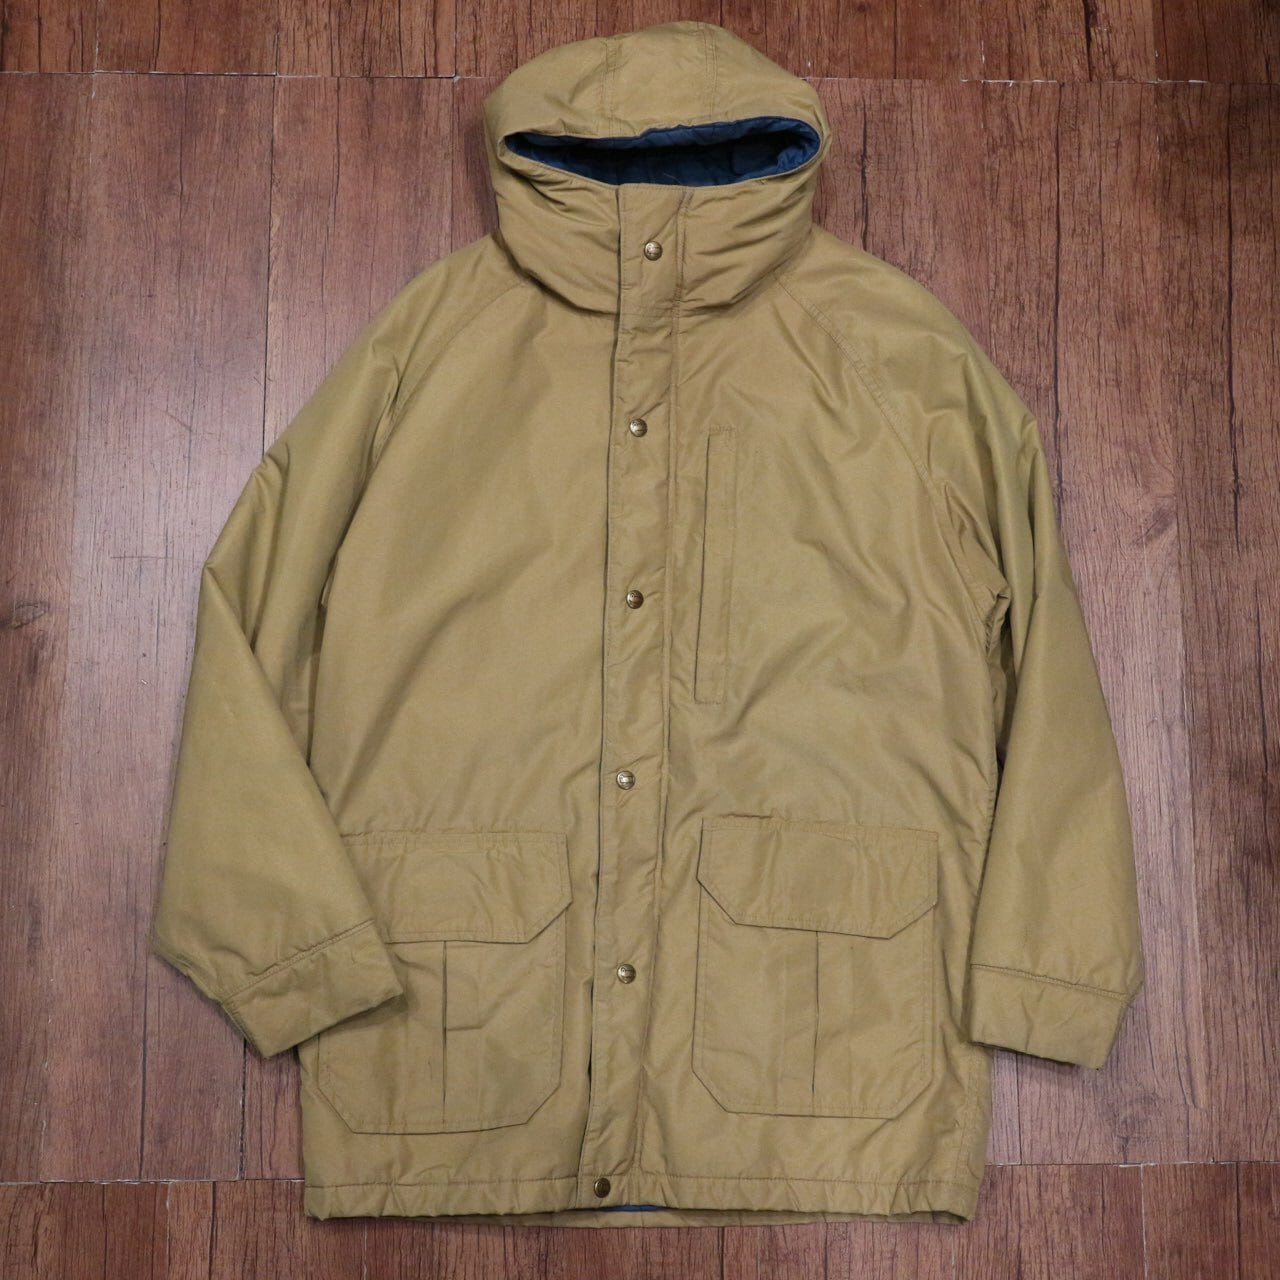 90s woolrich GORE-TEX アメリカ製 マウンテンパーカー ボア